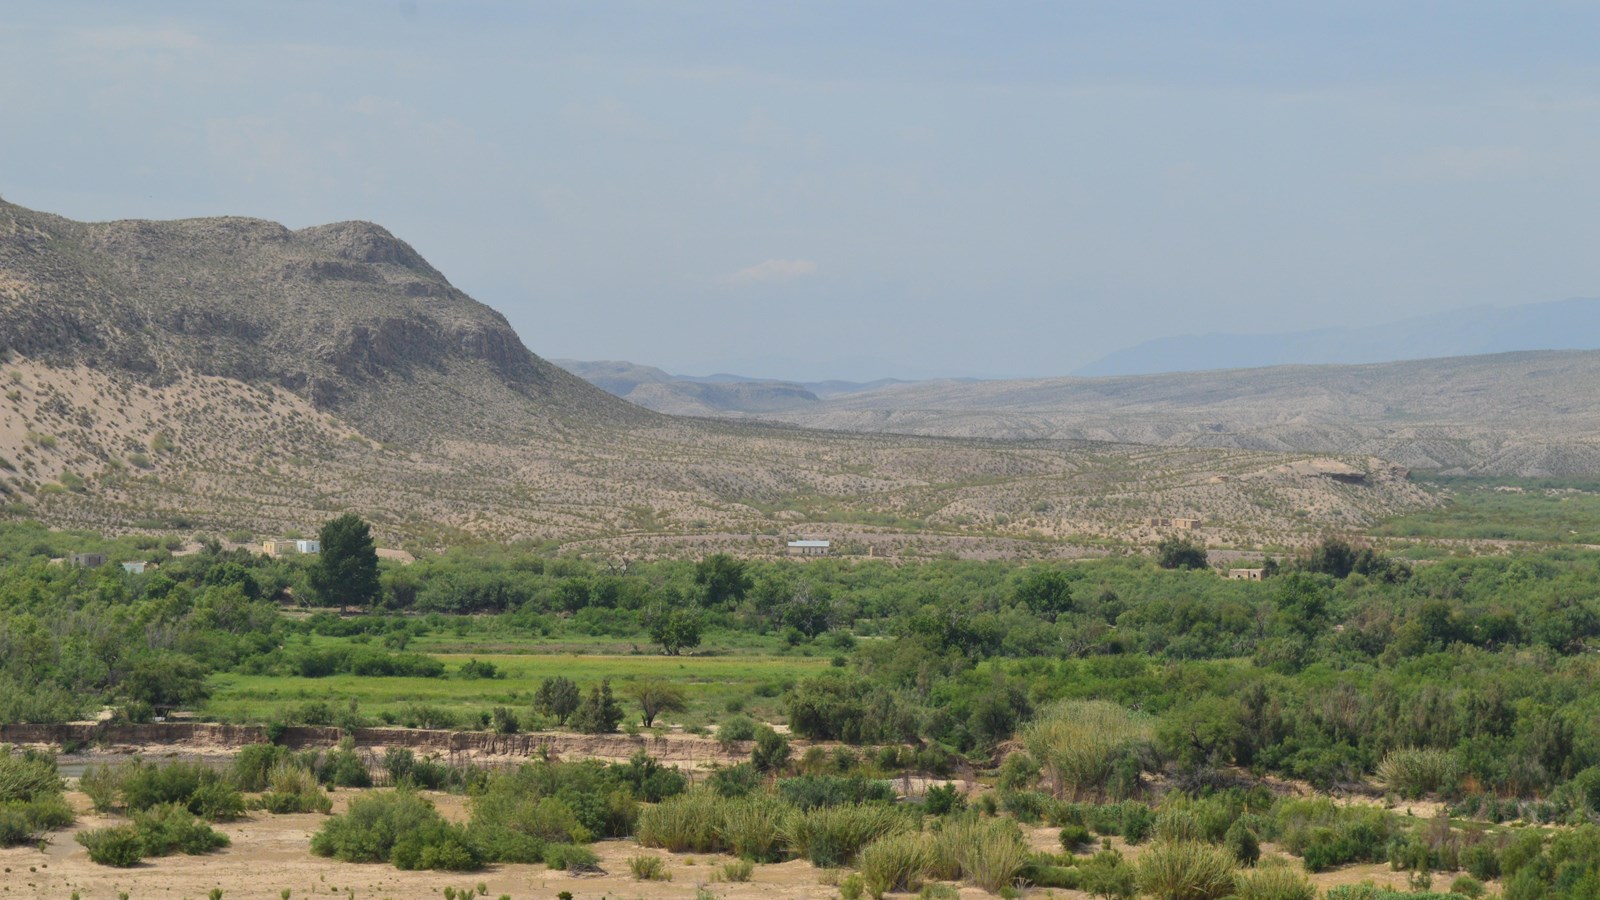 Six buildings are visible in the distance, on the other side of the Rio Grande.